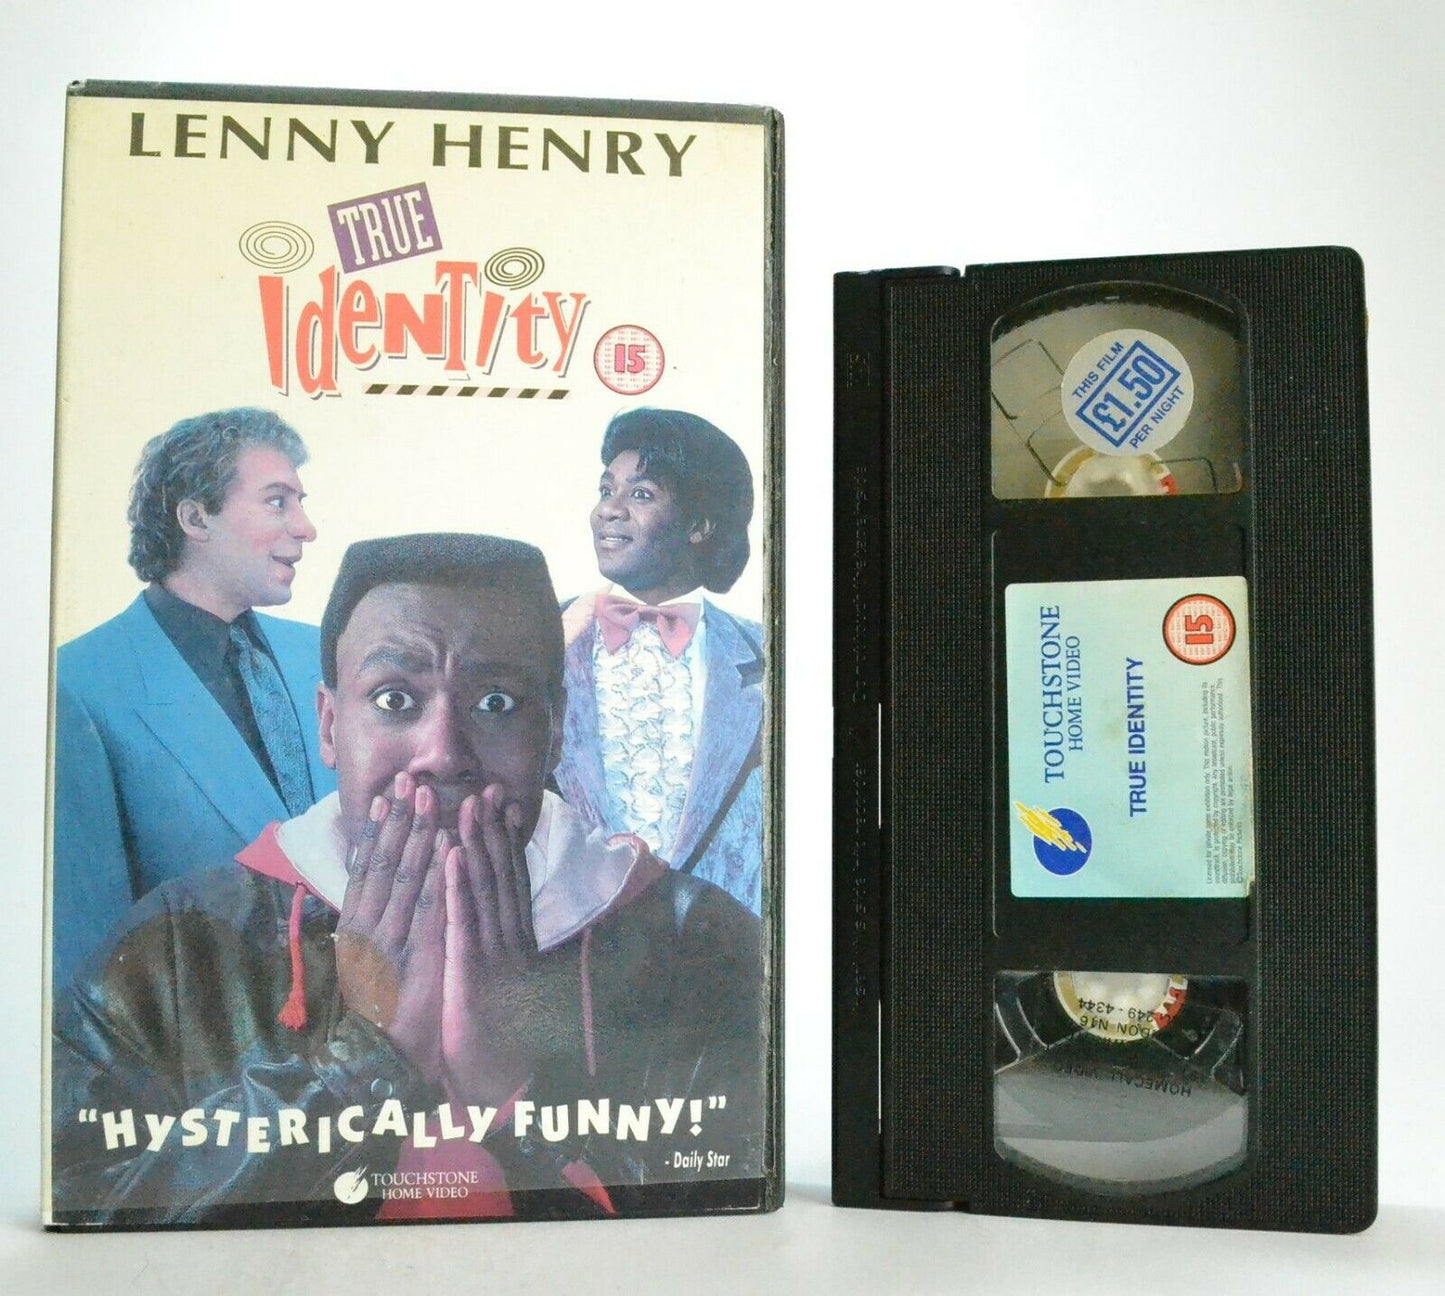 True Identity: Touchstone (1991) - Comedy - Large Box - Lenny Henry - OOP Pal VHS-